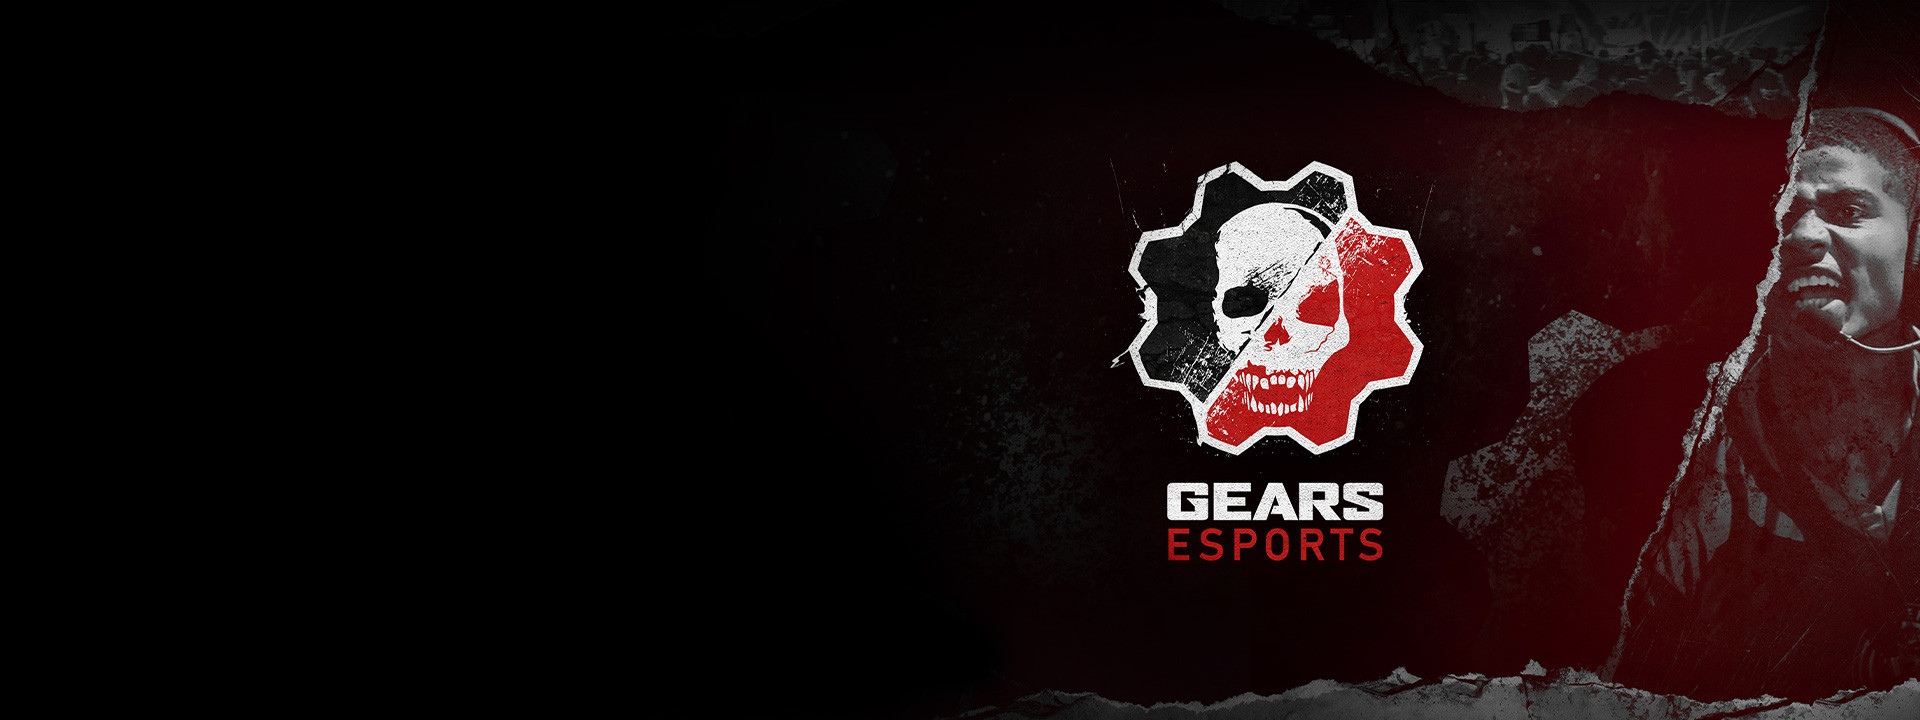 Black, red and white skull cog logo, Gears Esports over a faded background of red, black, and grey textures.